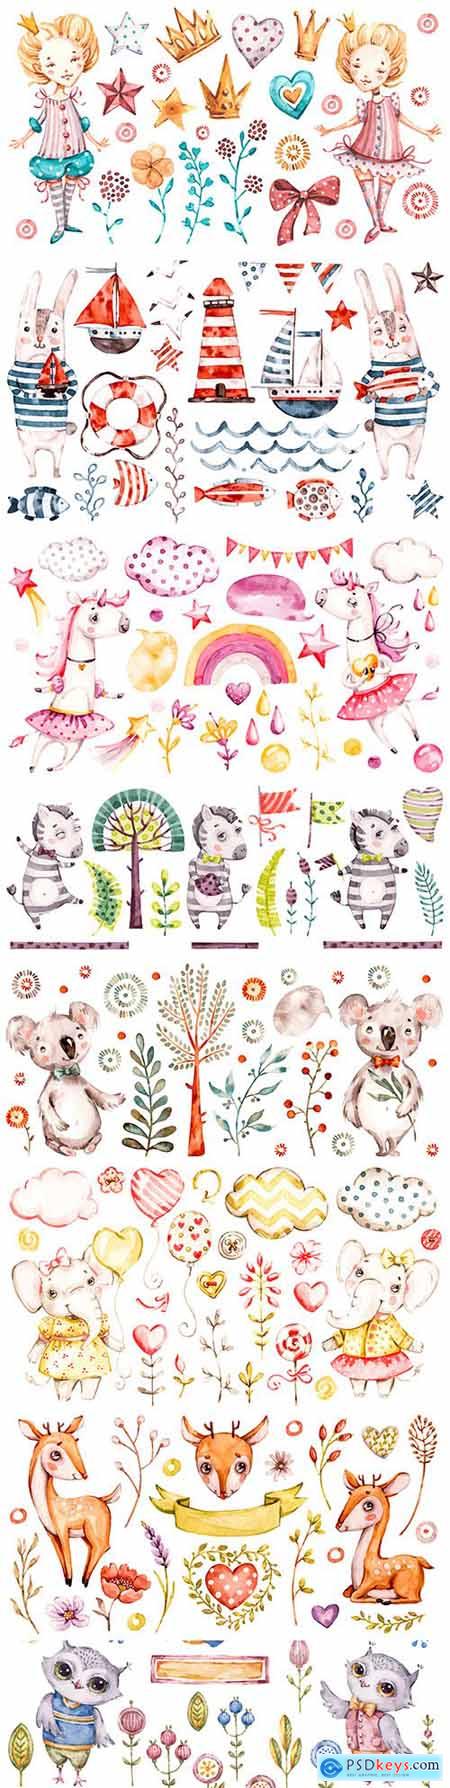 Cute animals and elements watercolor illustrations